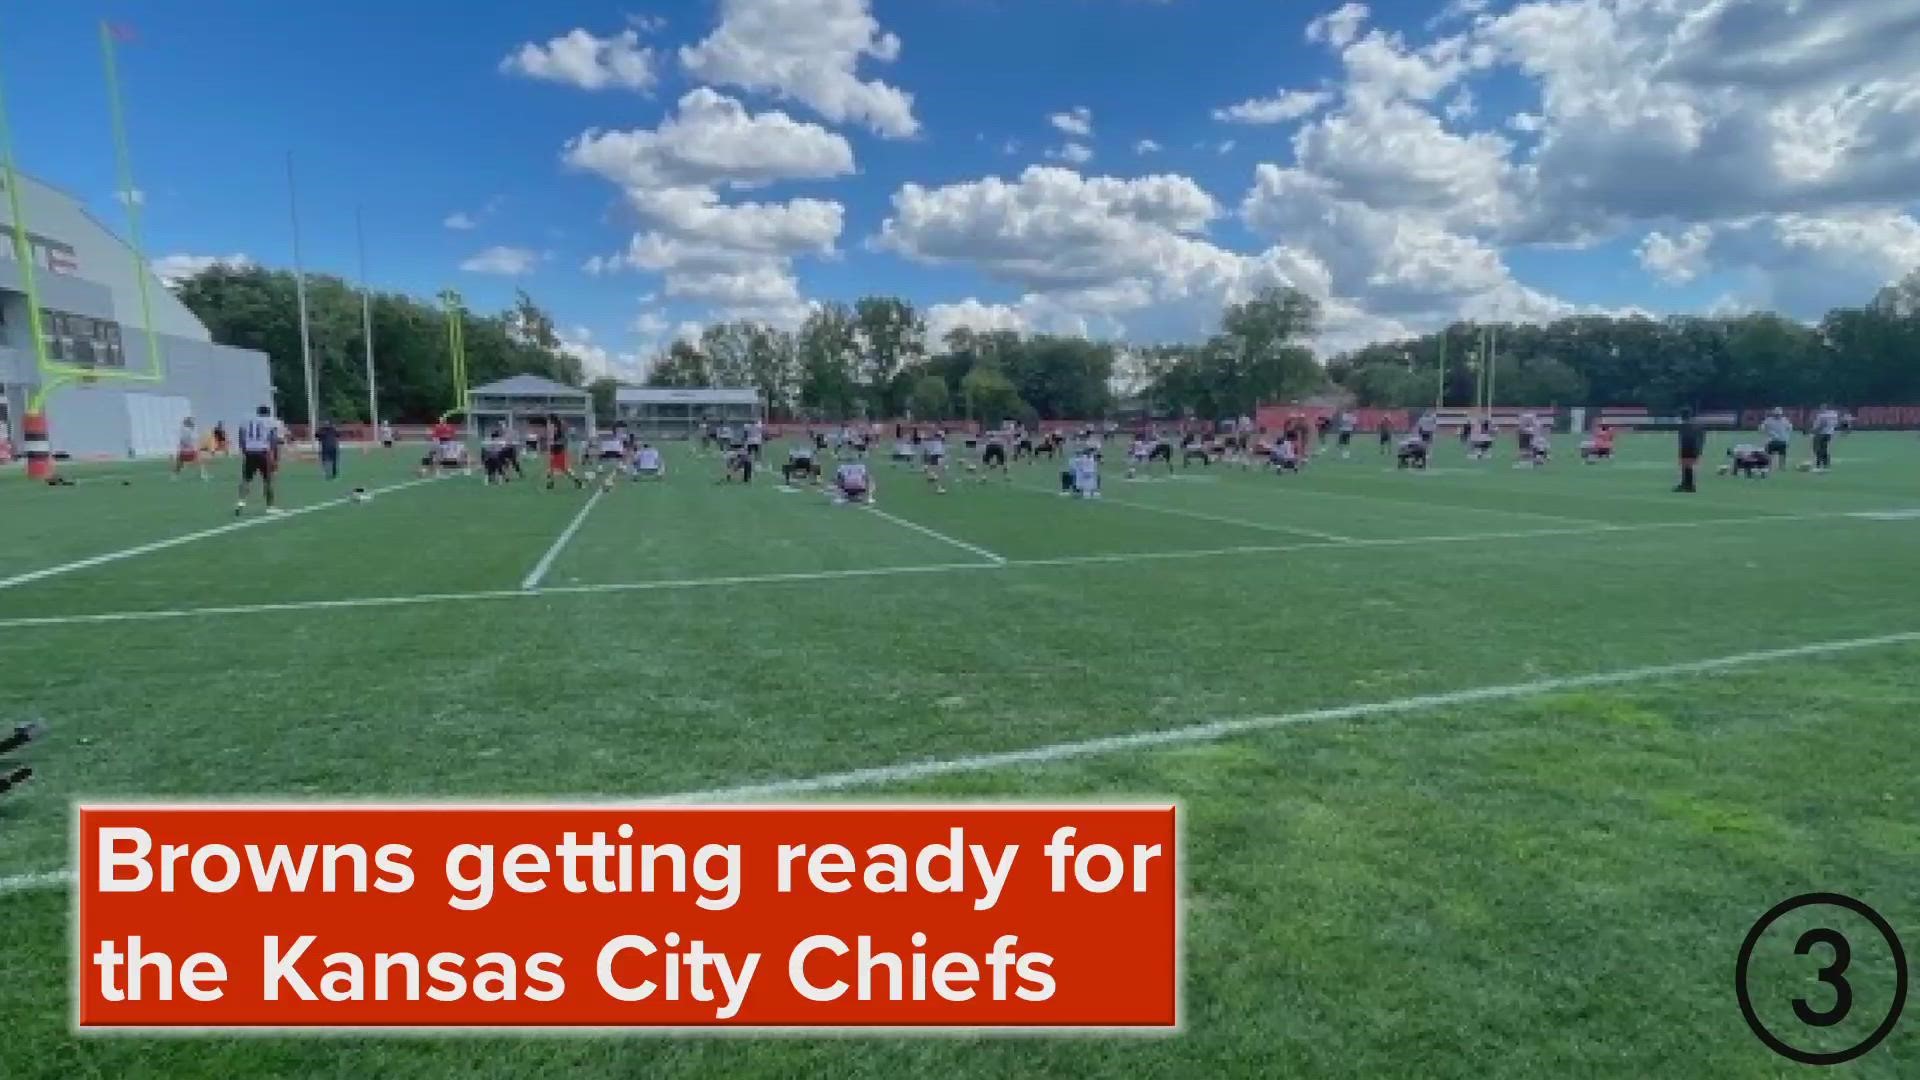 The Cleveland Browns are back at work in Berea getting ready for the Kansas City Chiefs.